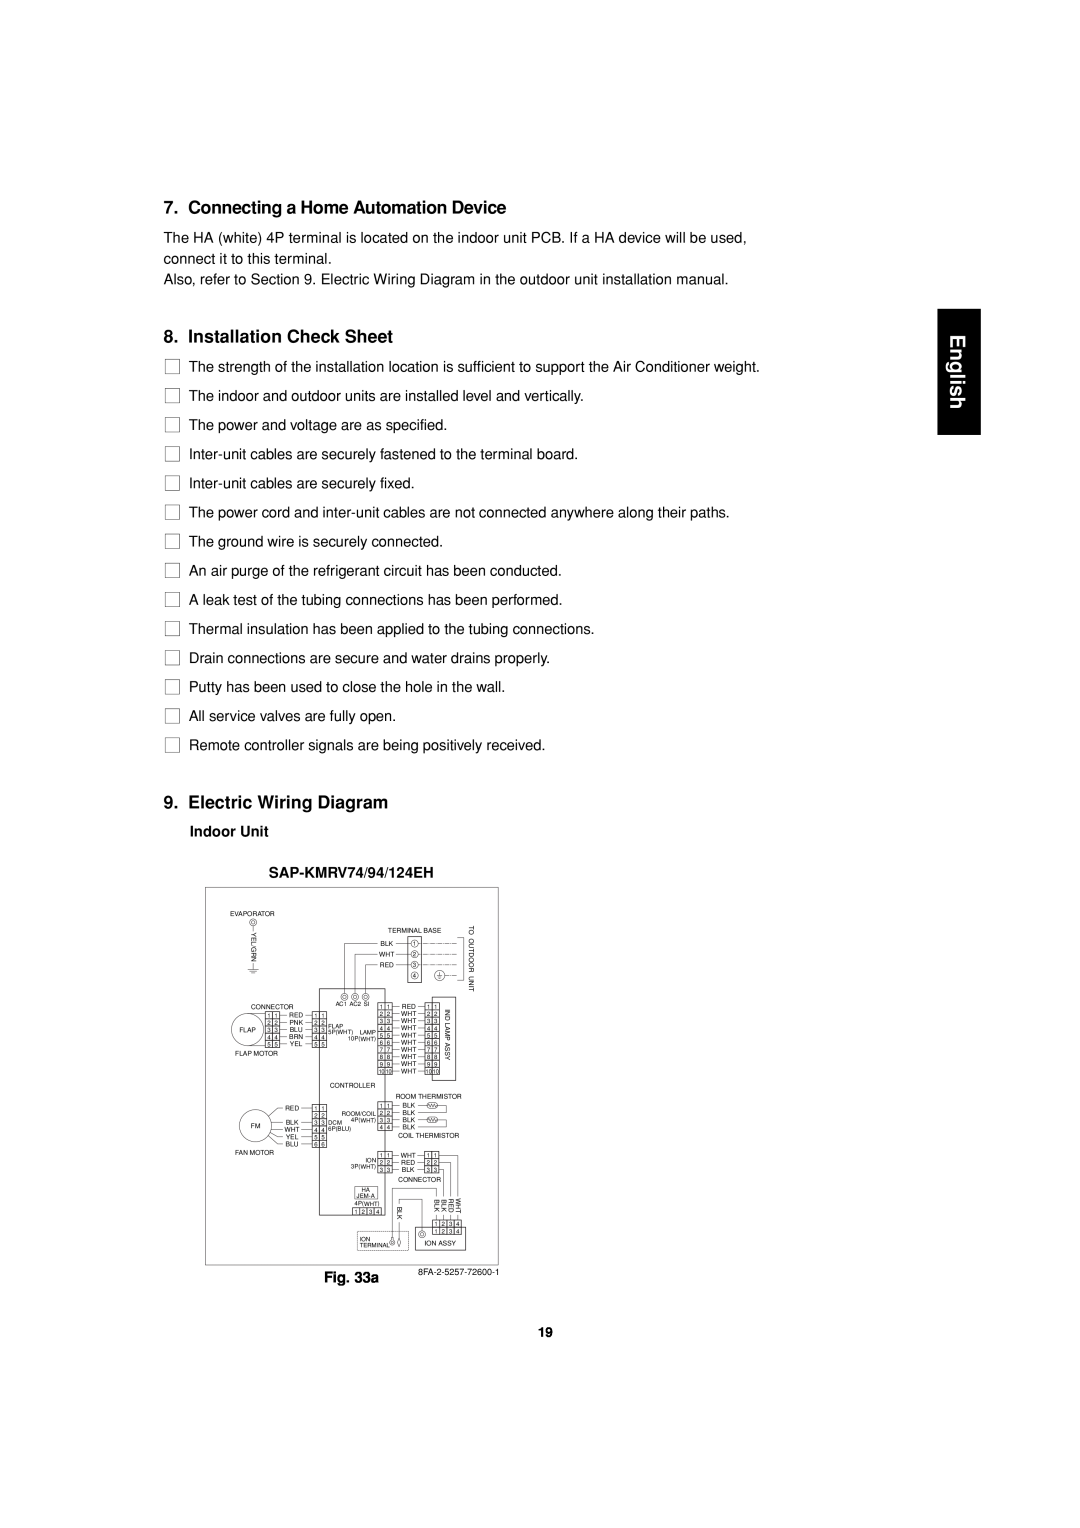 Sanyo SAP-CMRV1426EH-F English, Connecting a Home Automation Device, Installation Check Sheet, Electric Wiring Diagram 